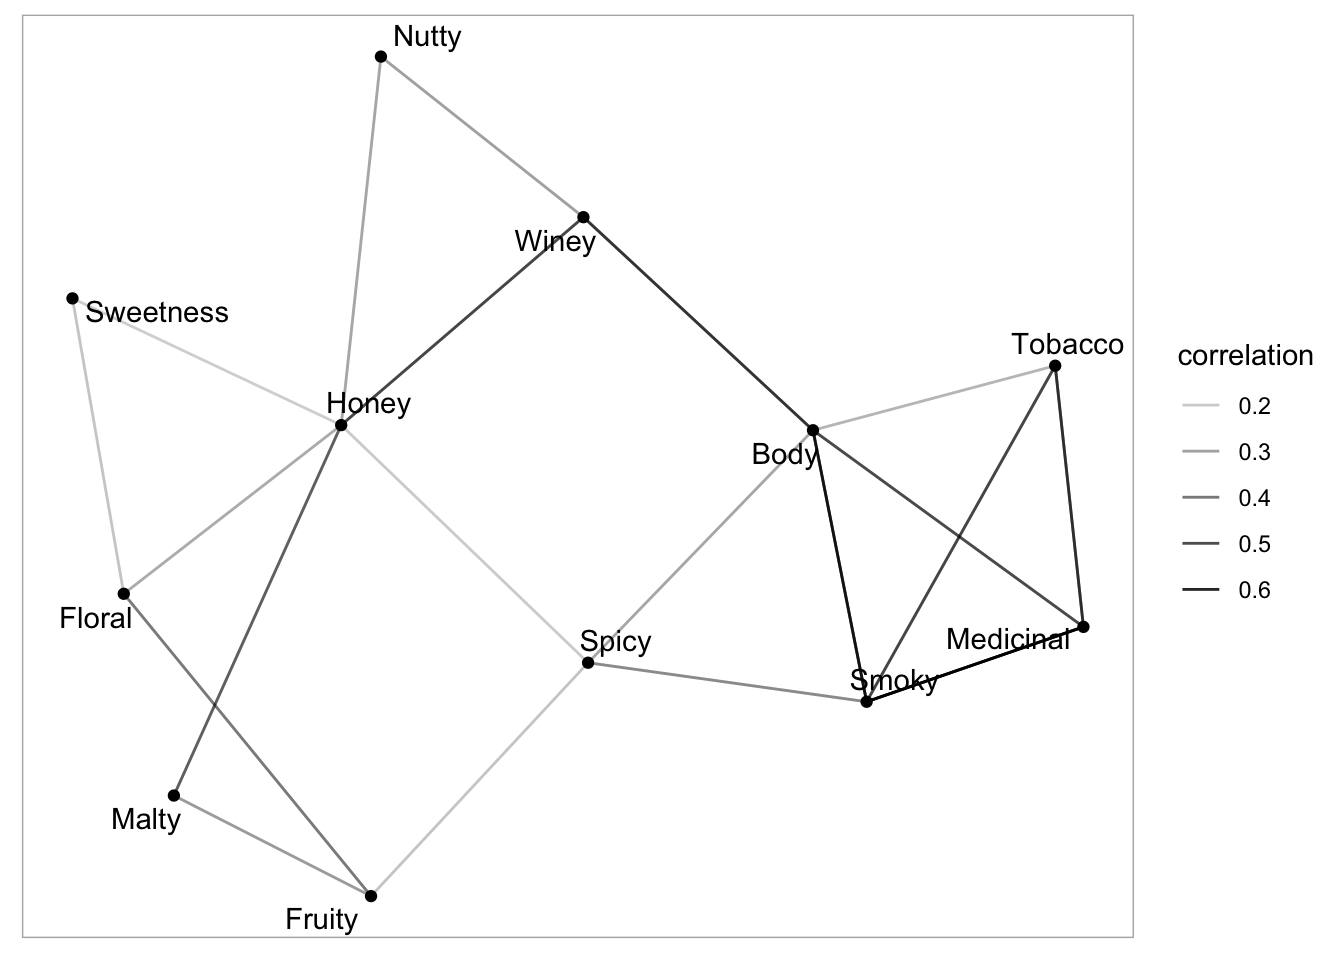 A network plot of the pairwise correlations between flavour characteristics.